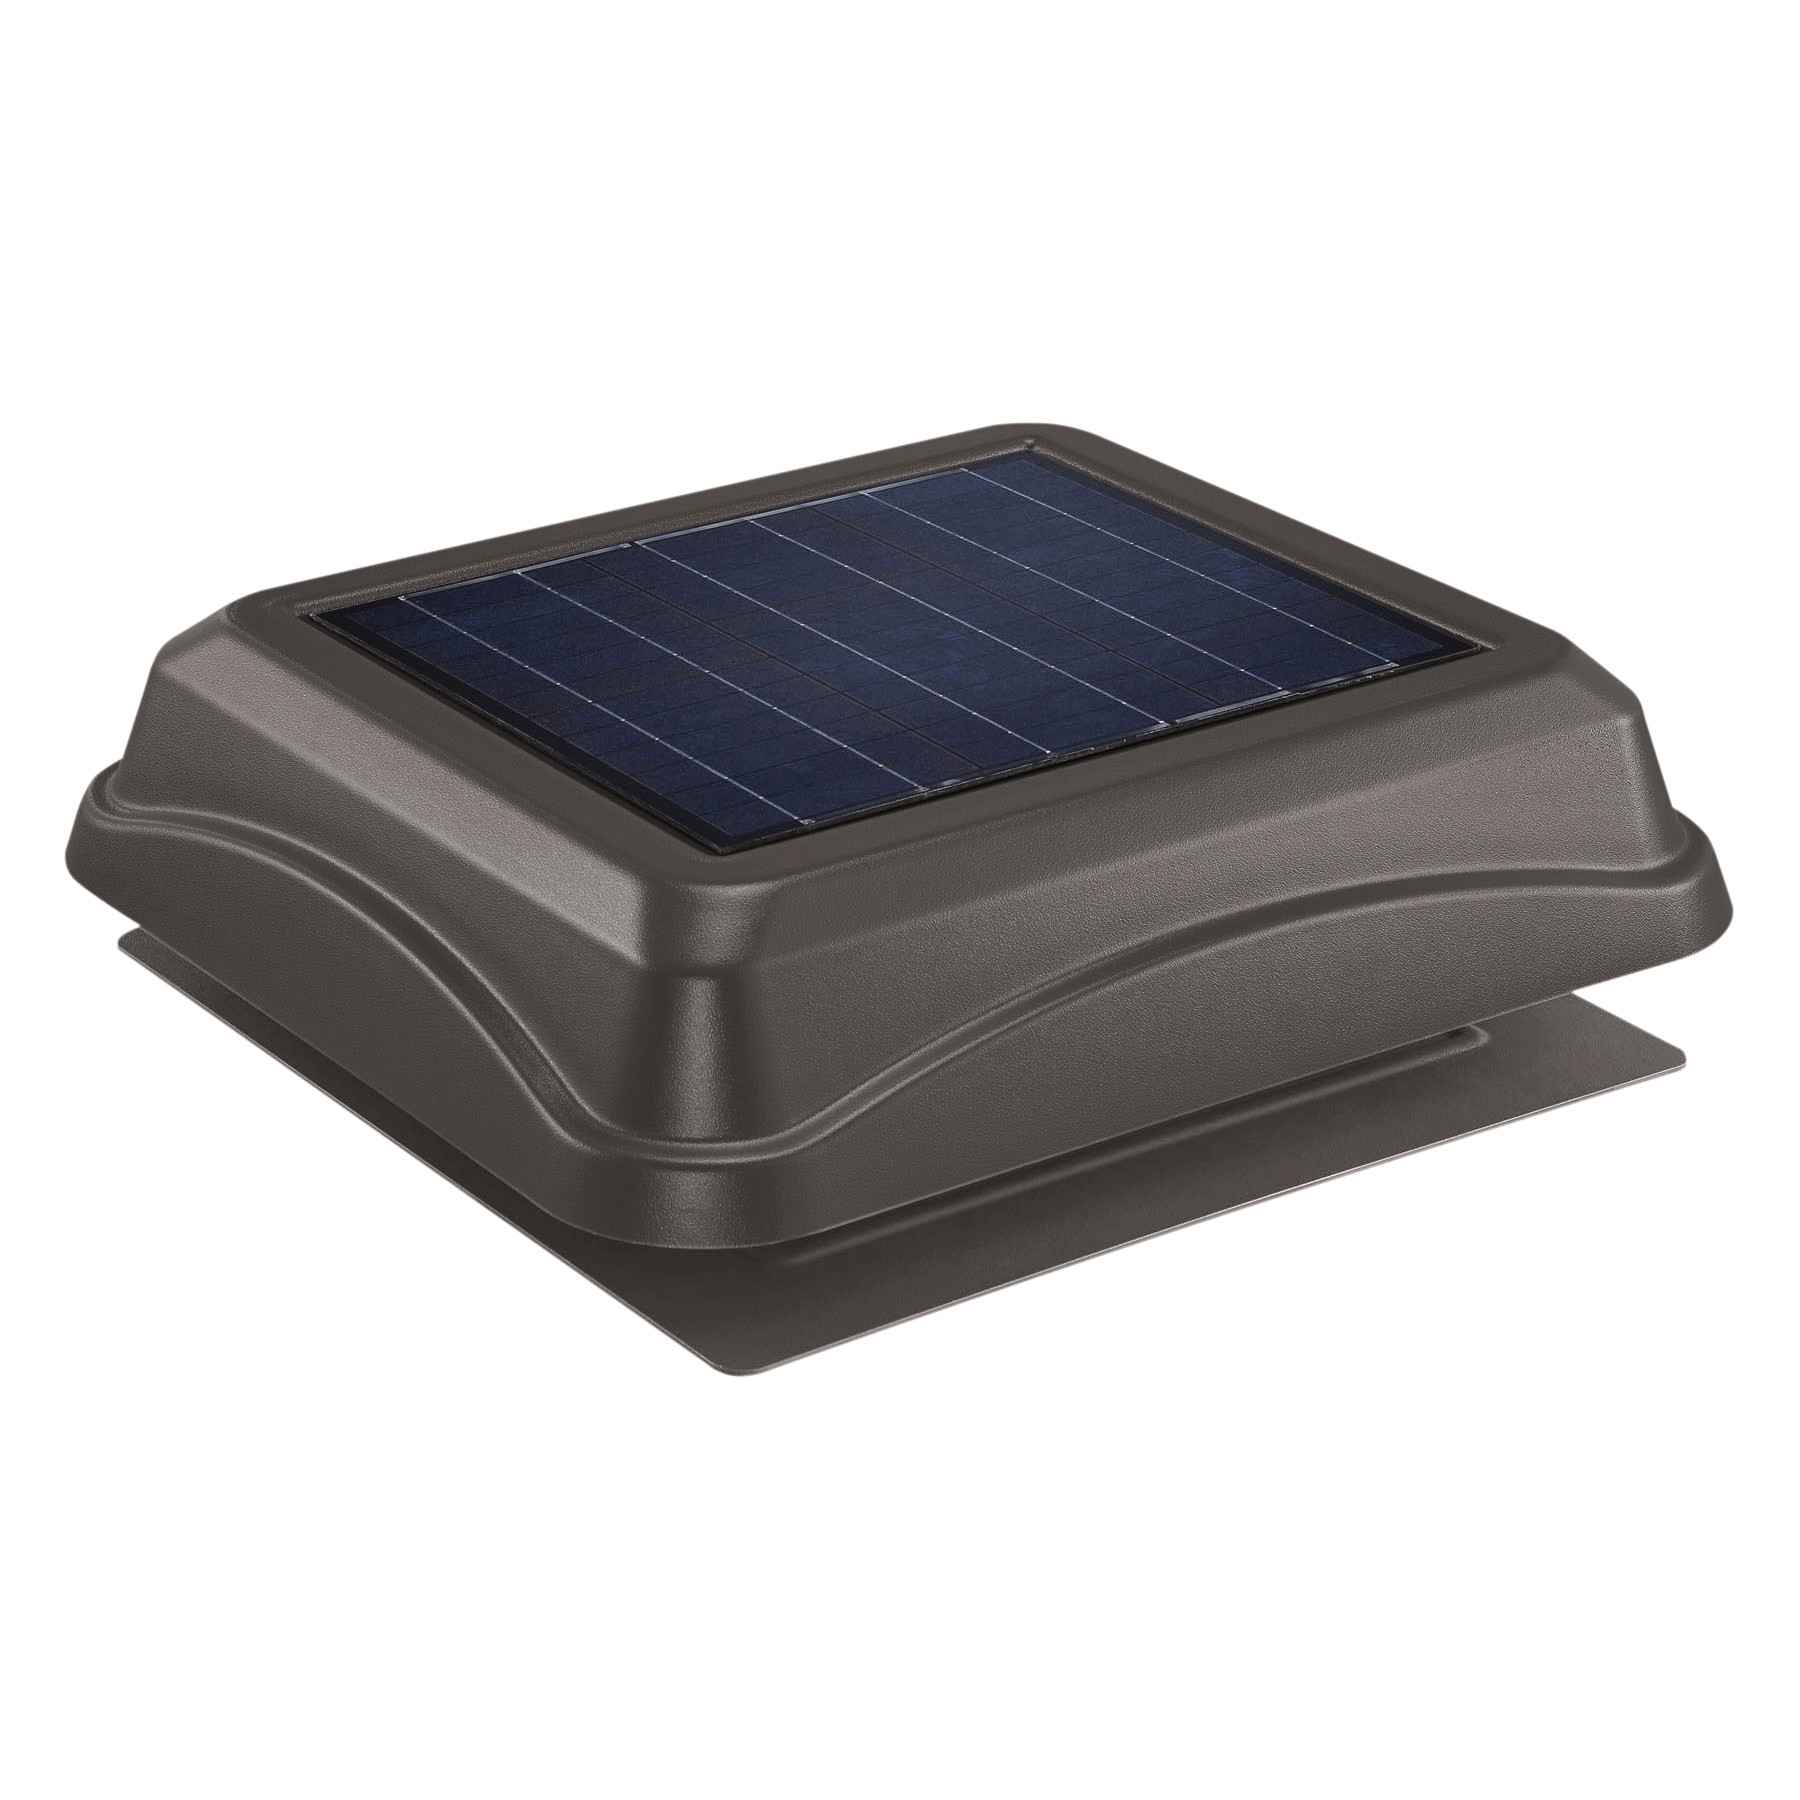 **DISCONTINUED** Broan® 537 CFM Solar Powered Attic and Garage Ventilation Fan, Surface Mount, Weathered Wood